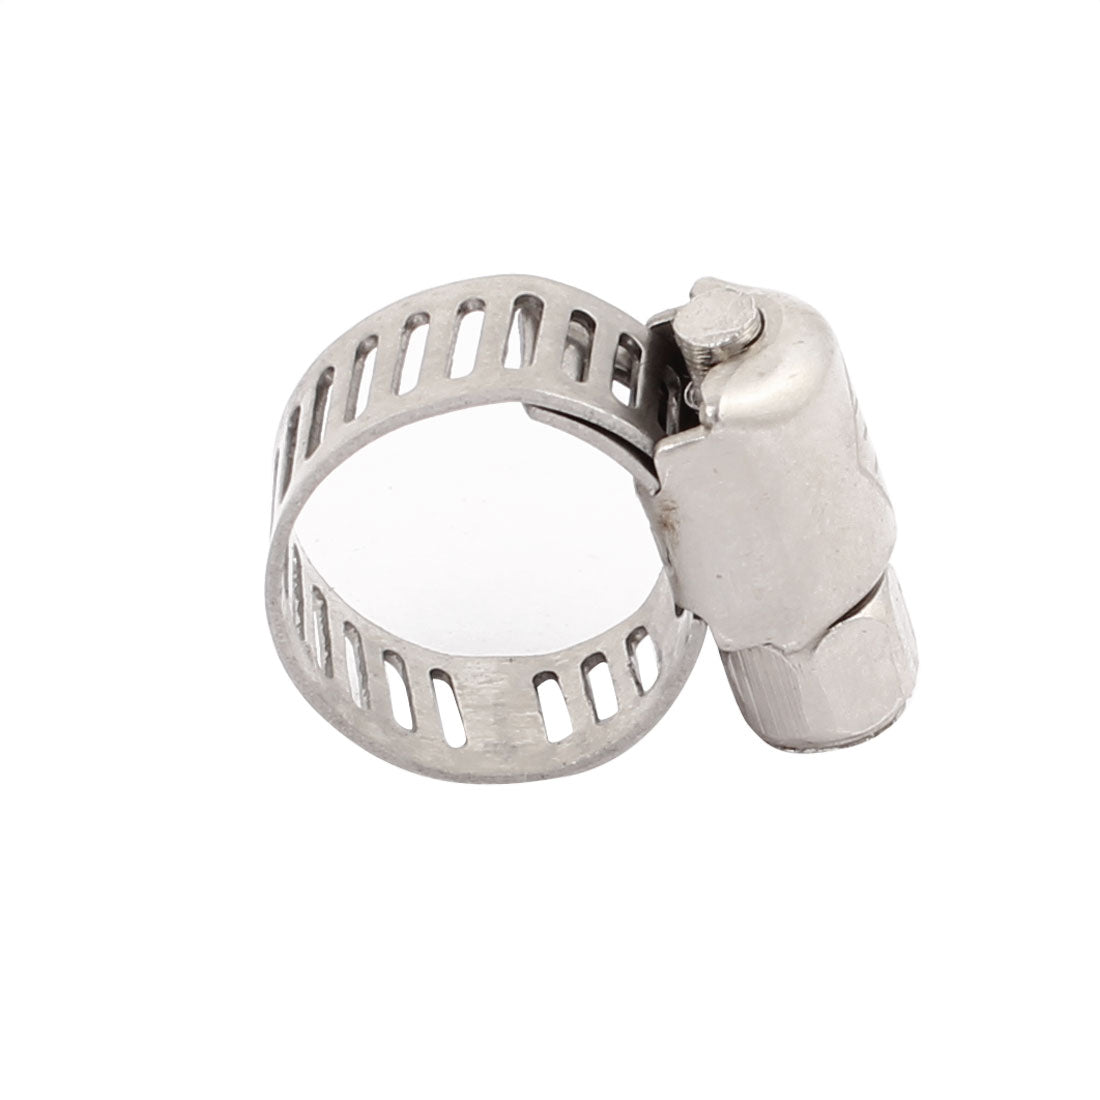 uxcell Uxcell 6mm-12mm Adjustable Range 8mm Width Stainless Steel  Gear Hose Clamp 20pcs